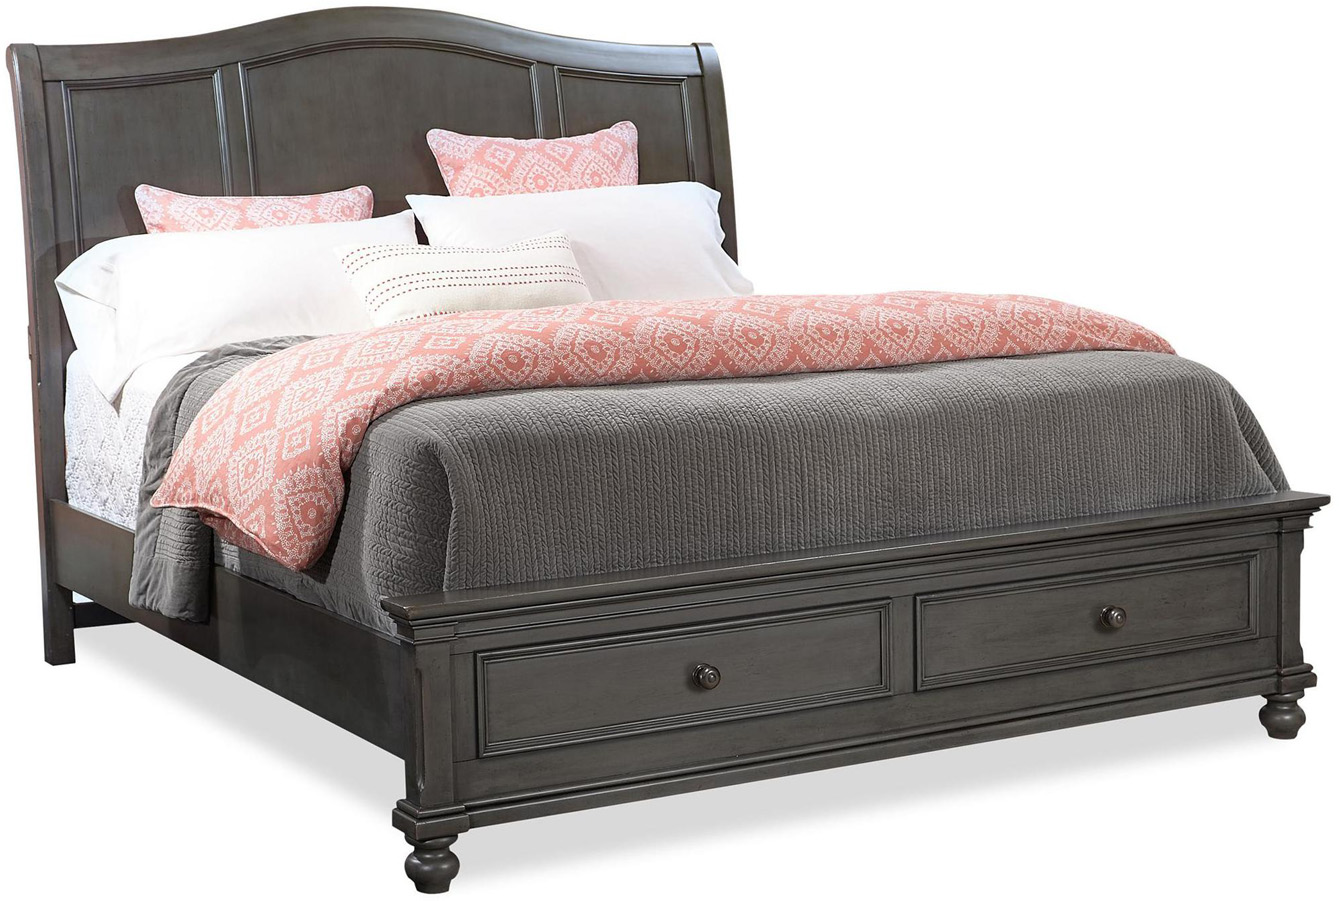 Oxford Sleigh Bed Aspenhome Furniture, Aspenhome Cambridge King Sleigh Bed